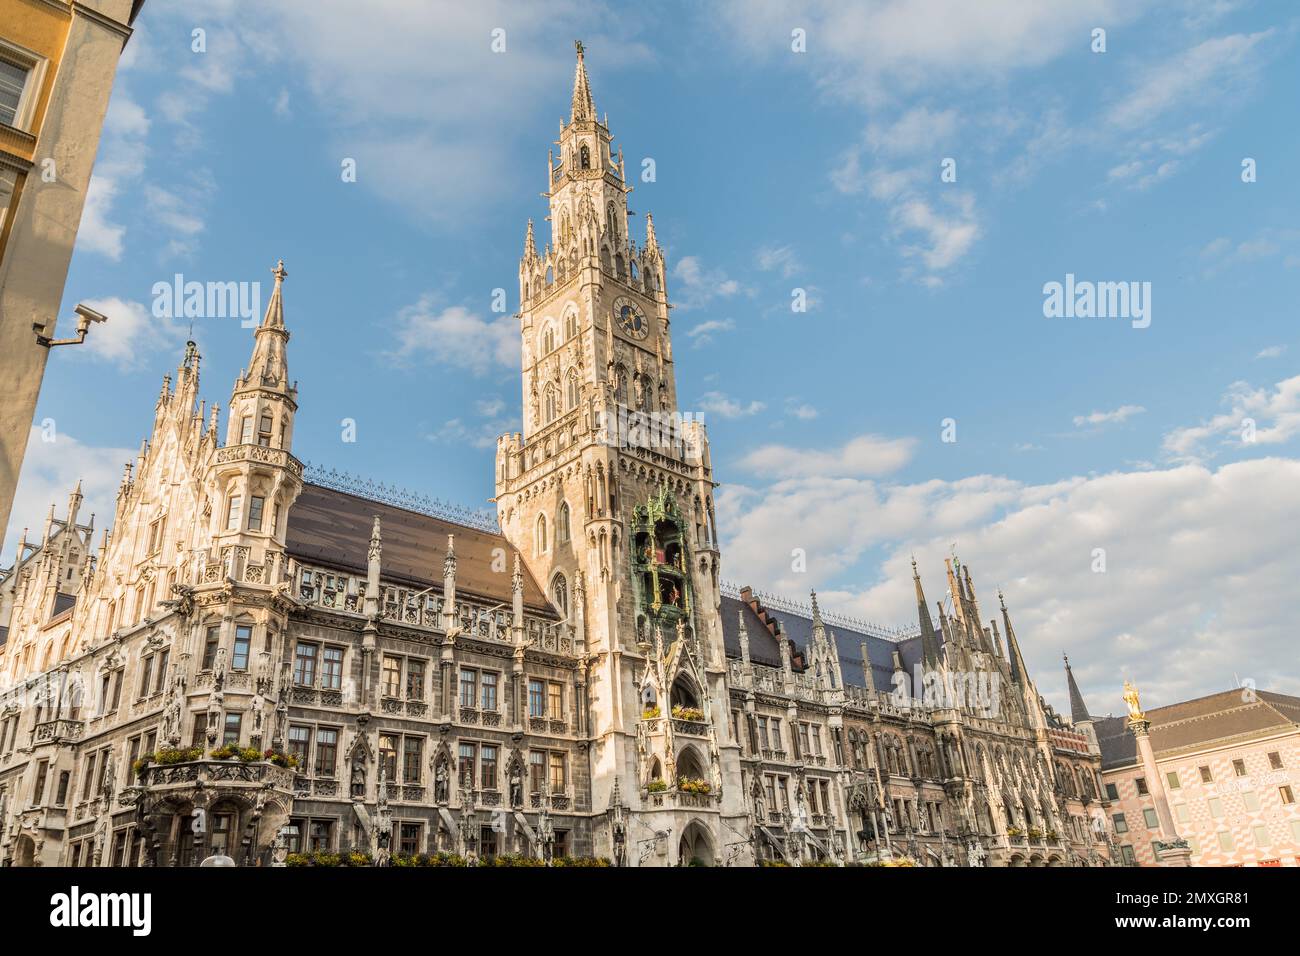 The Neue Rathaus (New Town Hall) is a magnificent neo-gothic building in Munich. Marienplatz is a central square in the city centre of Munich, Germany Stock Photo